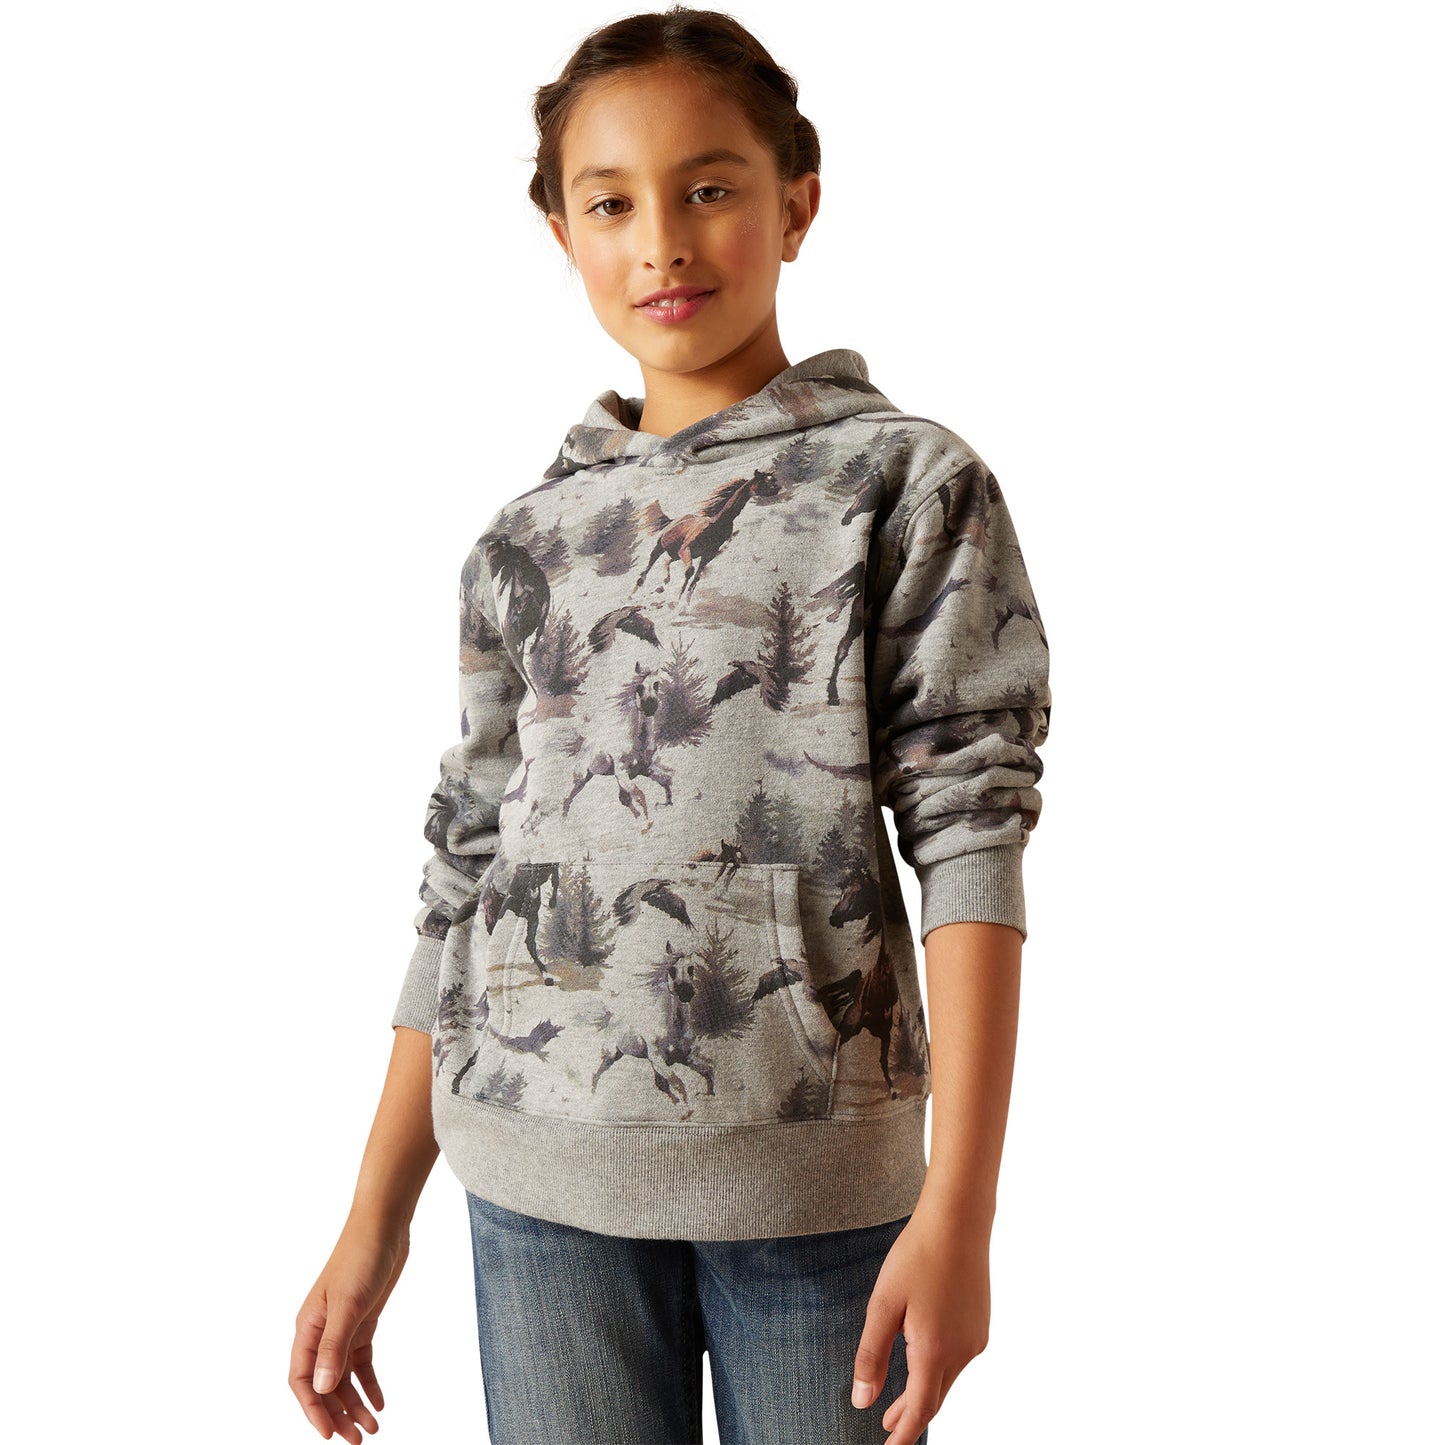 Ariat Youth Girl's Misty Horse Print Heather Grey Hoodie 10047331